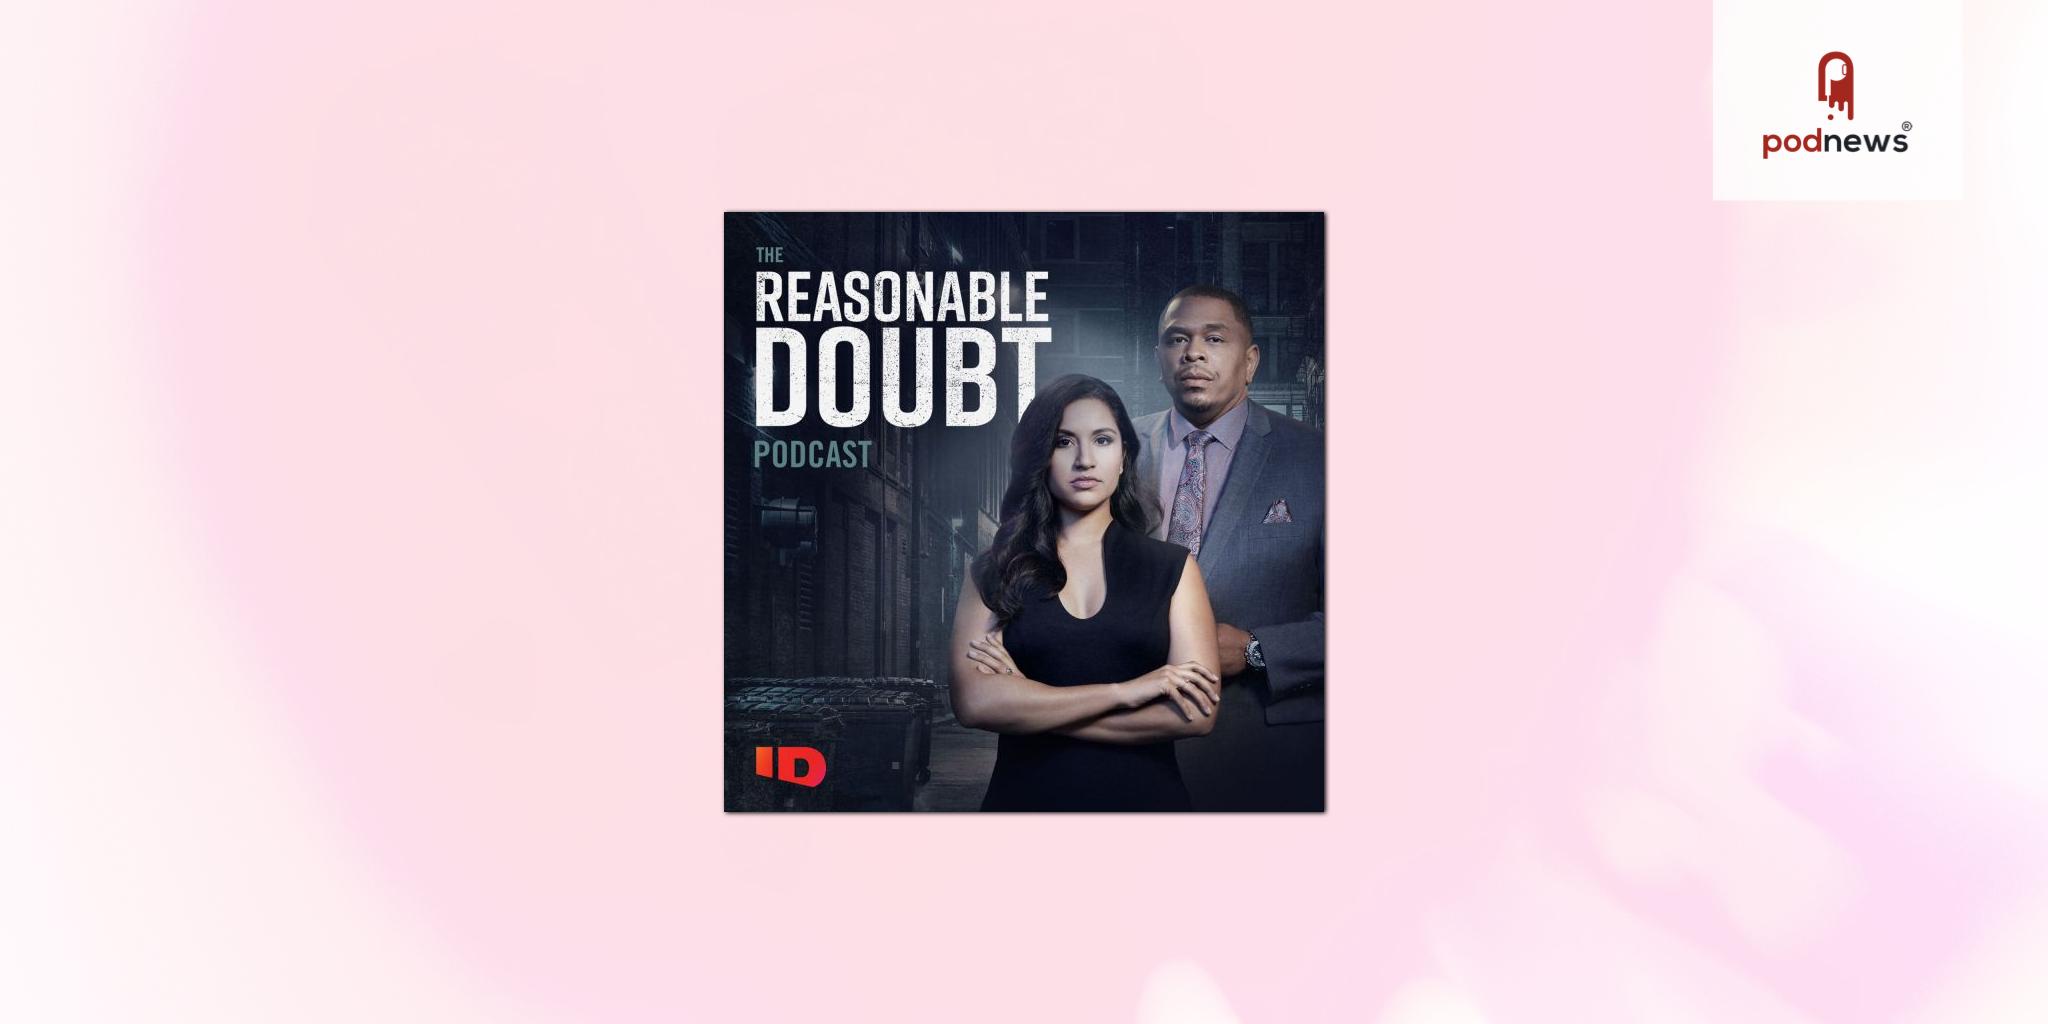 Season 2 of The Reasonable Doubt Podcast launches